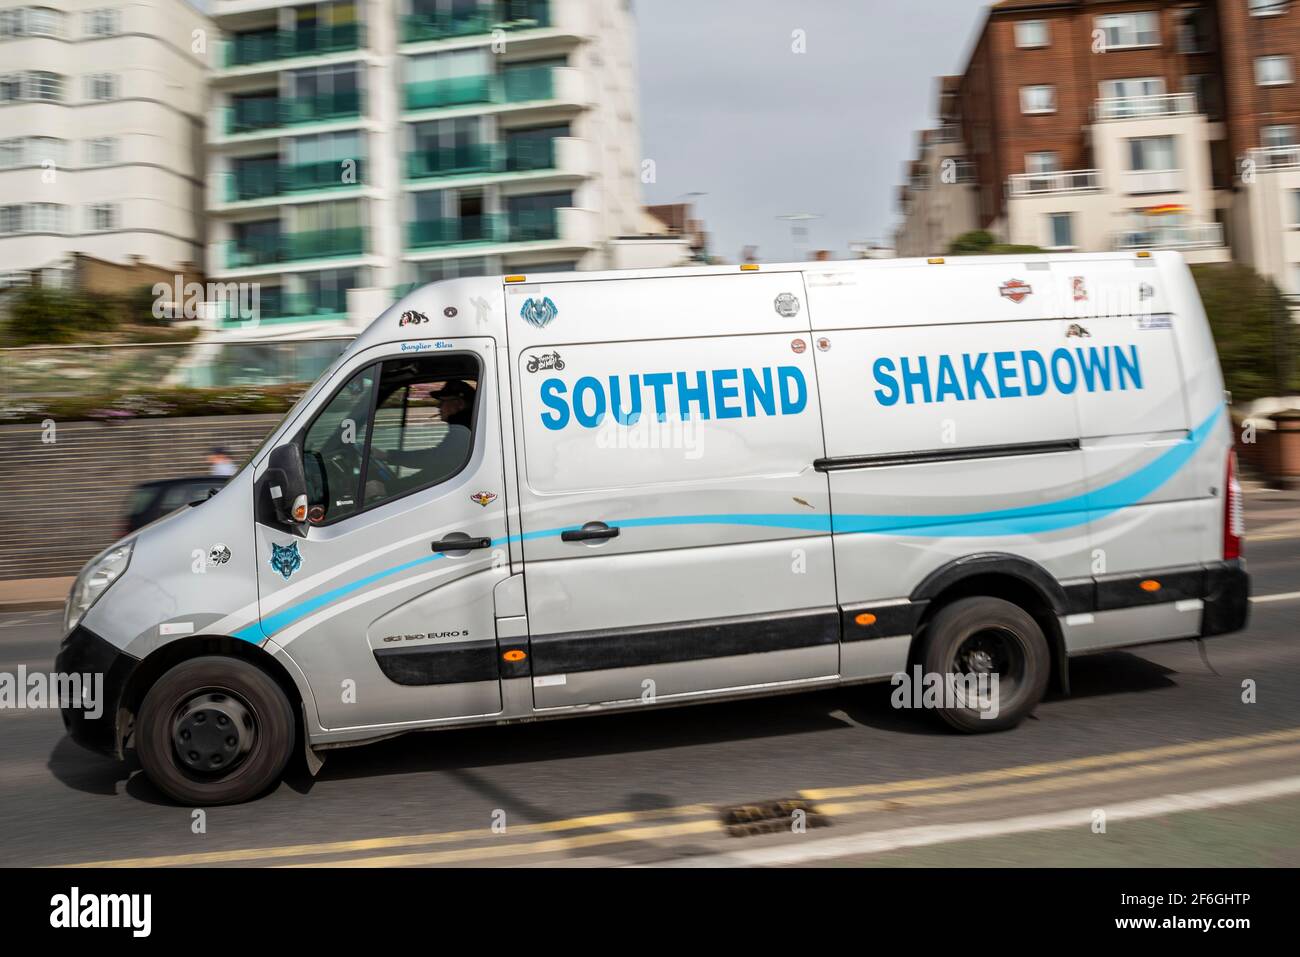 Southend Shakedown van driving in Southend on Sea, Essex, UK. The Southend Shakedown is a motorcycle rally traditionally held at Easter in Southend Stock Photo